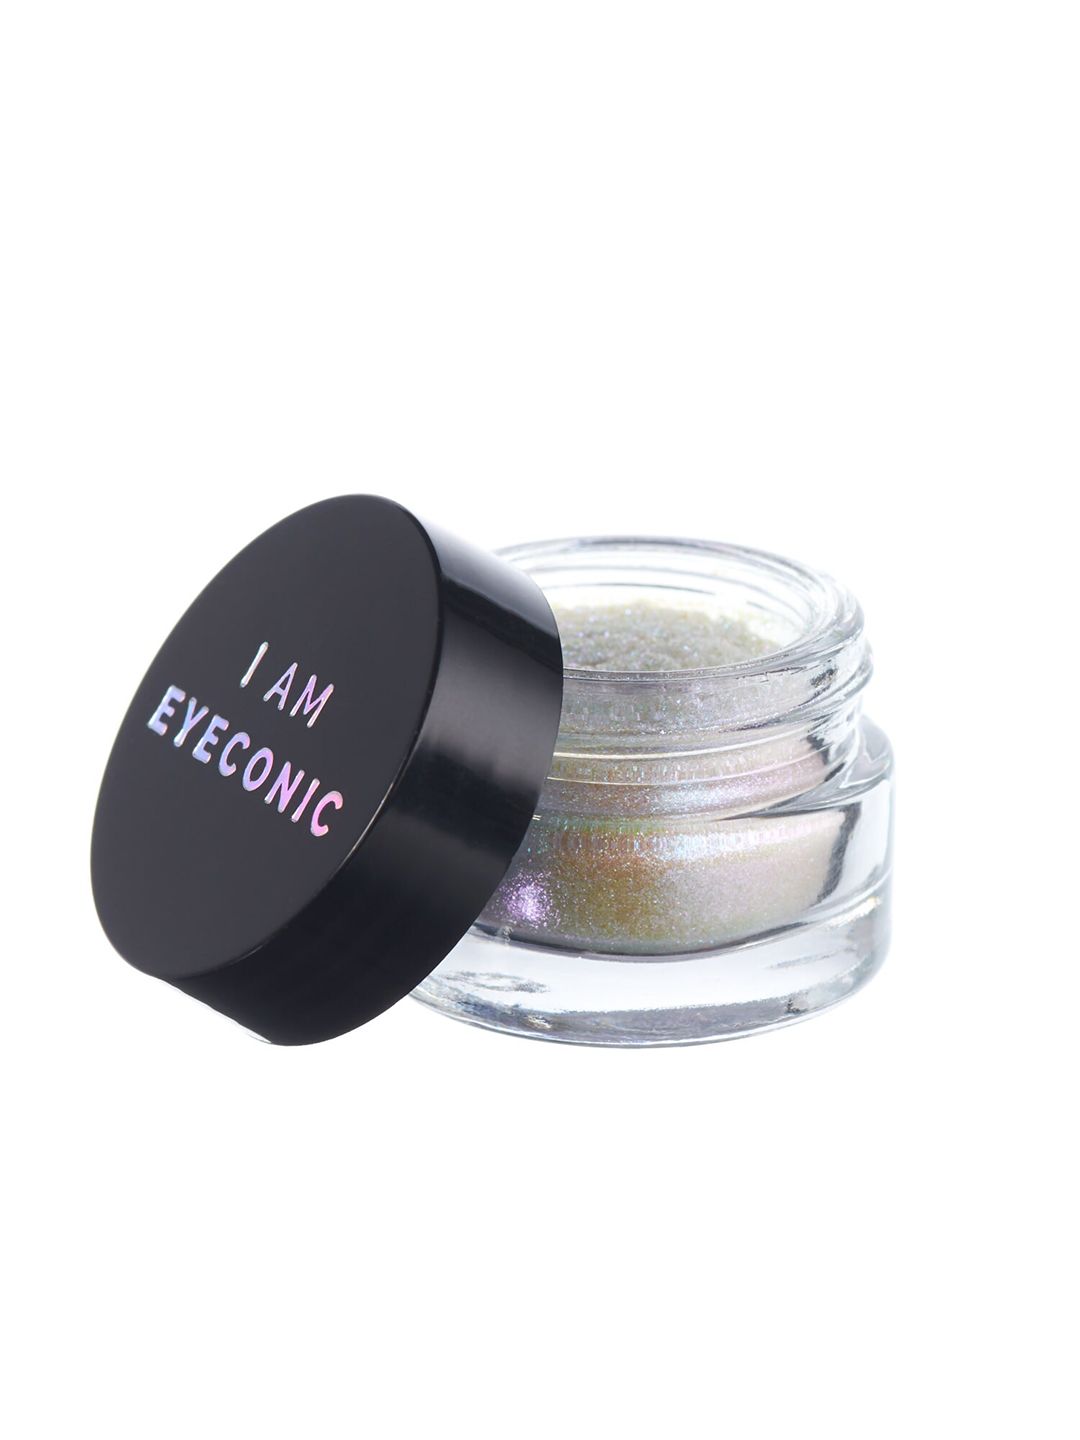 I AM EYECONIC Duo Chrome Pigments Eyeshadow - Bae Watching Price in India